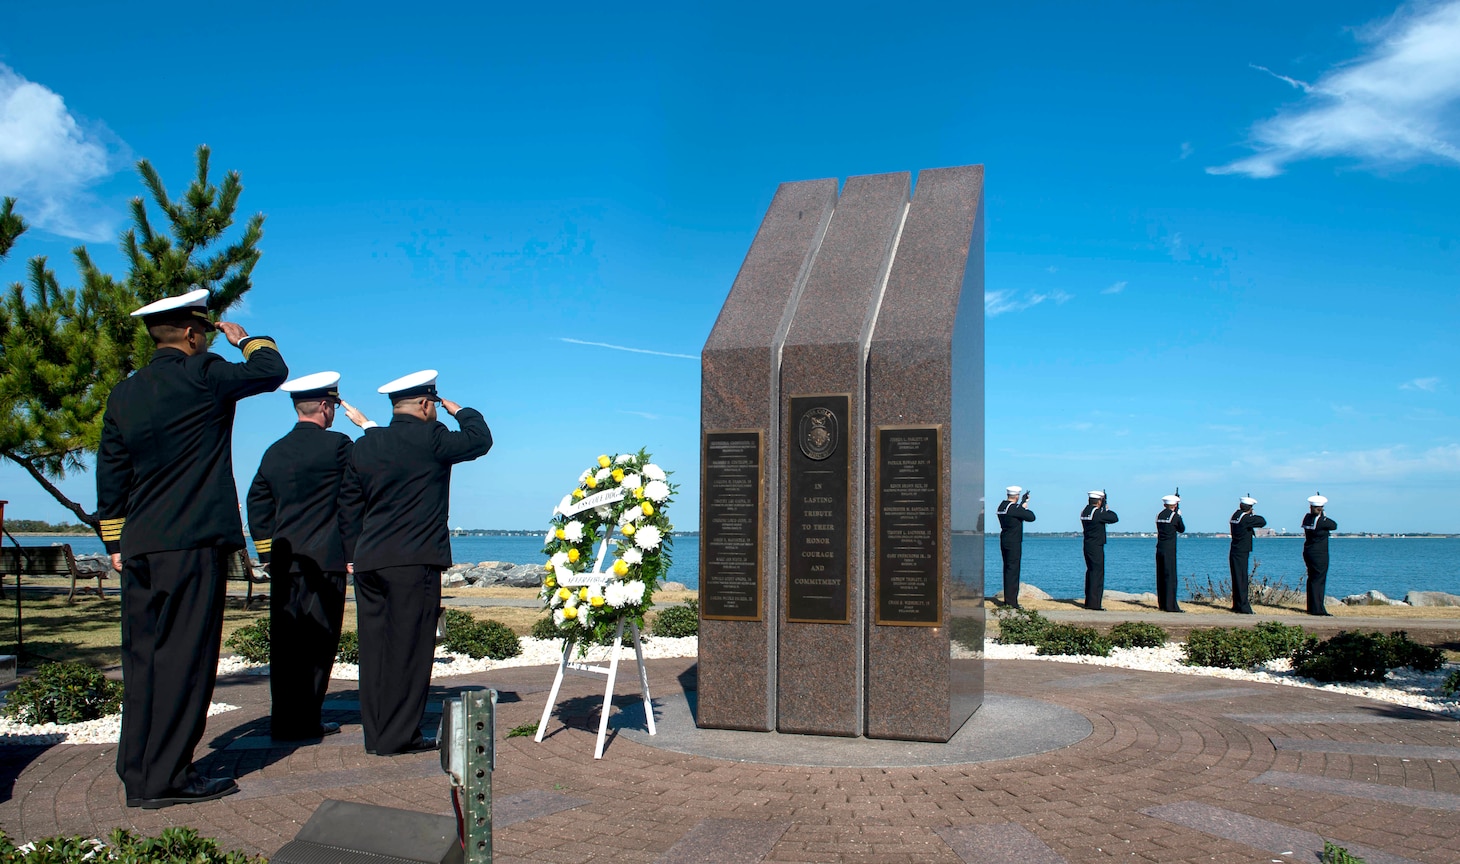 Sailors assigned to the Arleigh Burke-class guided missile-destroyer USS Cole (DDG 67) render honors at the USS Cole Memorial at Naval Station Norfolk during a commemoration of the Oct. 12, 2000 terrorist attack in Yemen that killed 17 Sailors.